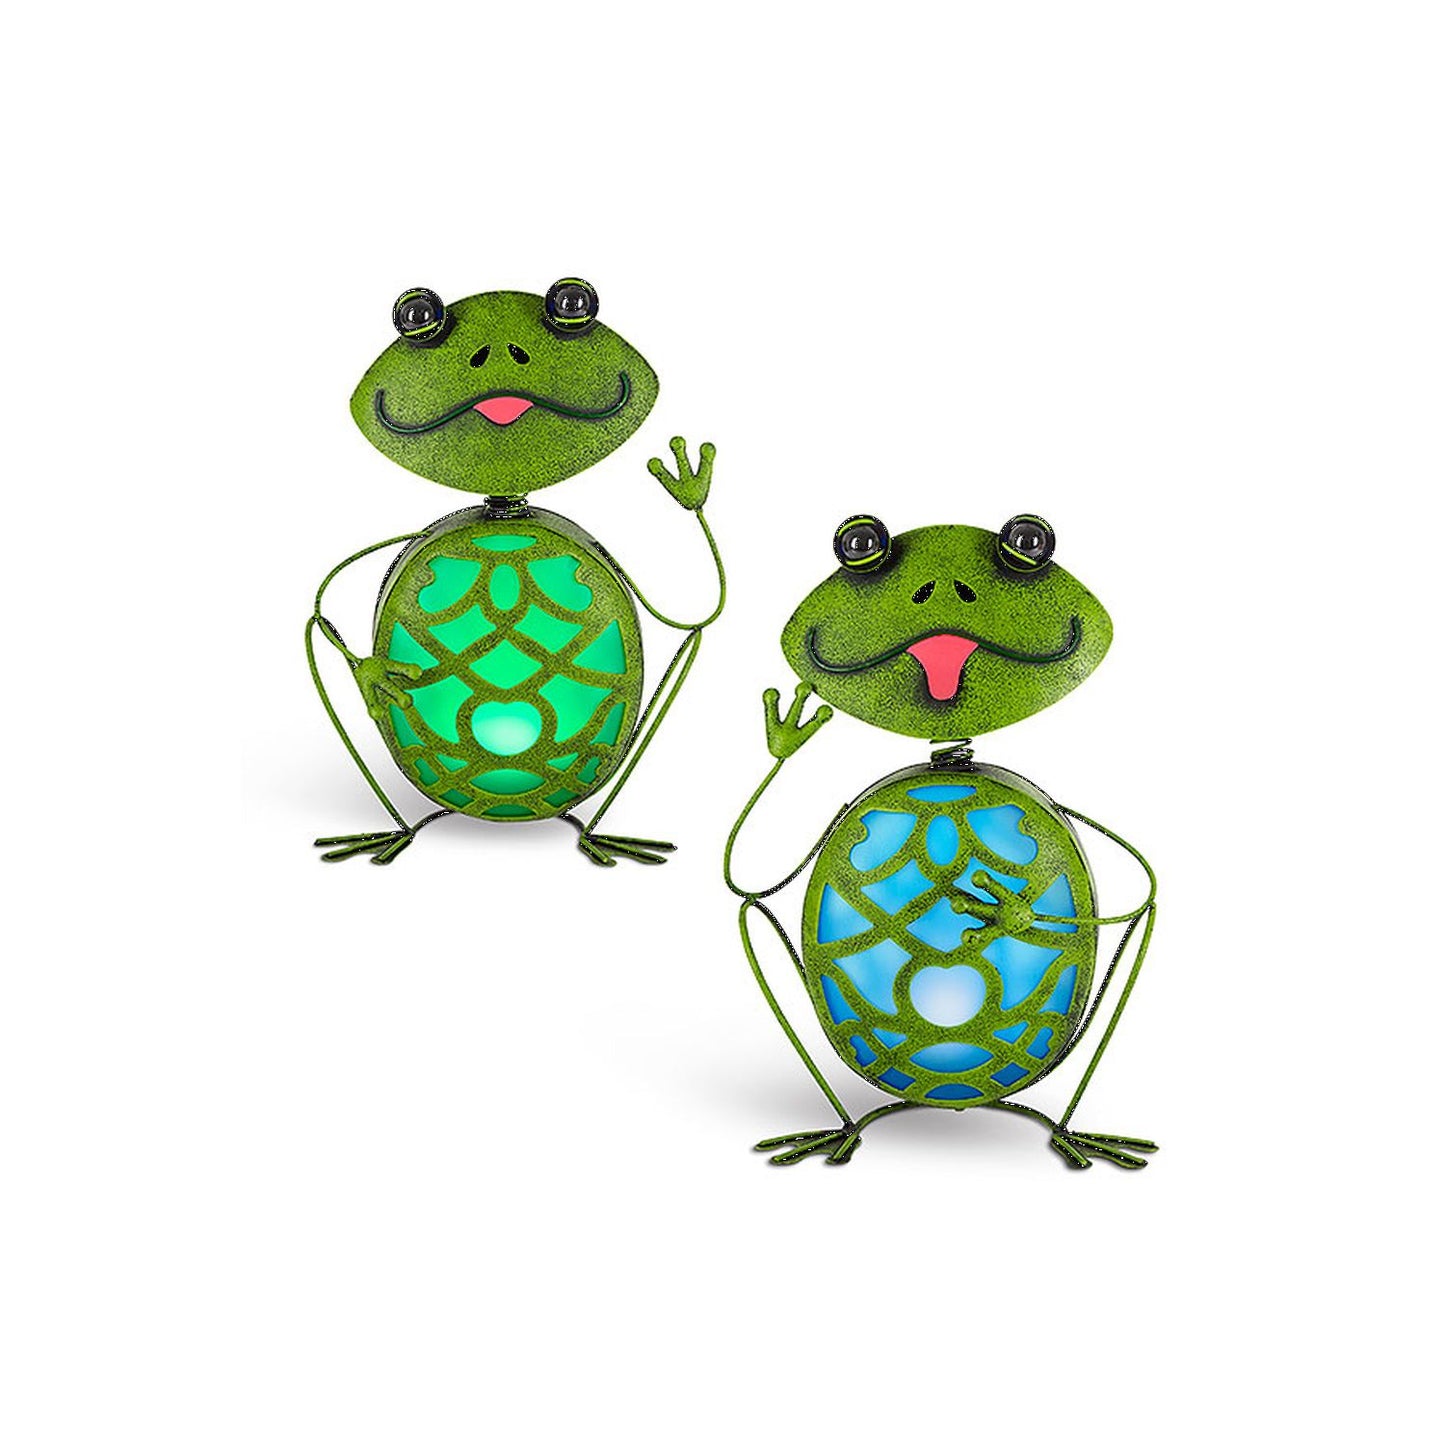 Gerson Company 10.43"X5.91"X15.35"H 2 Assorted Solar Metal Frog